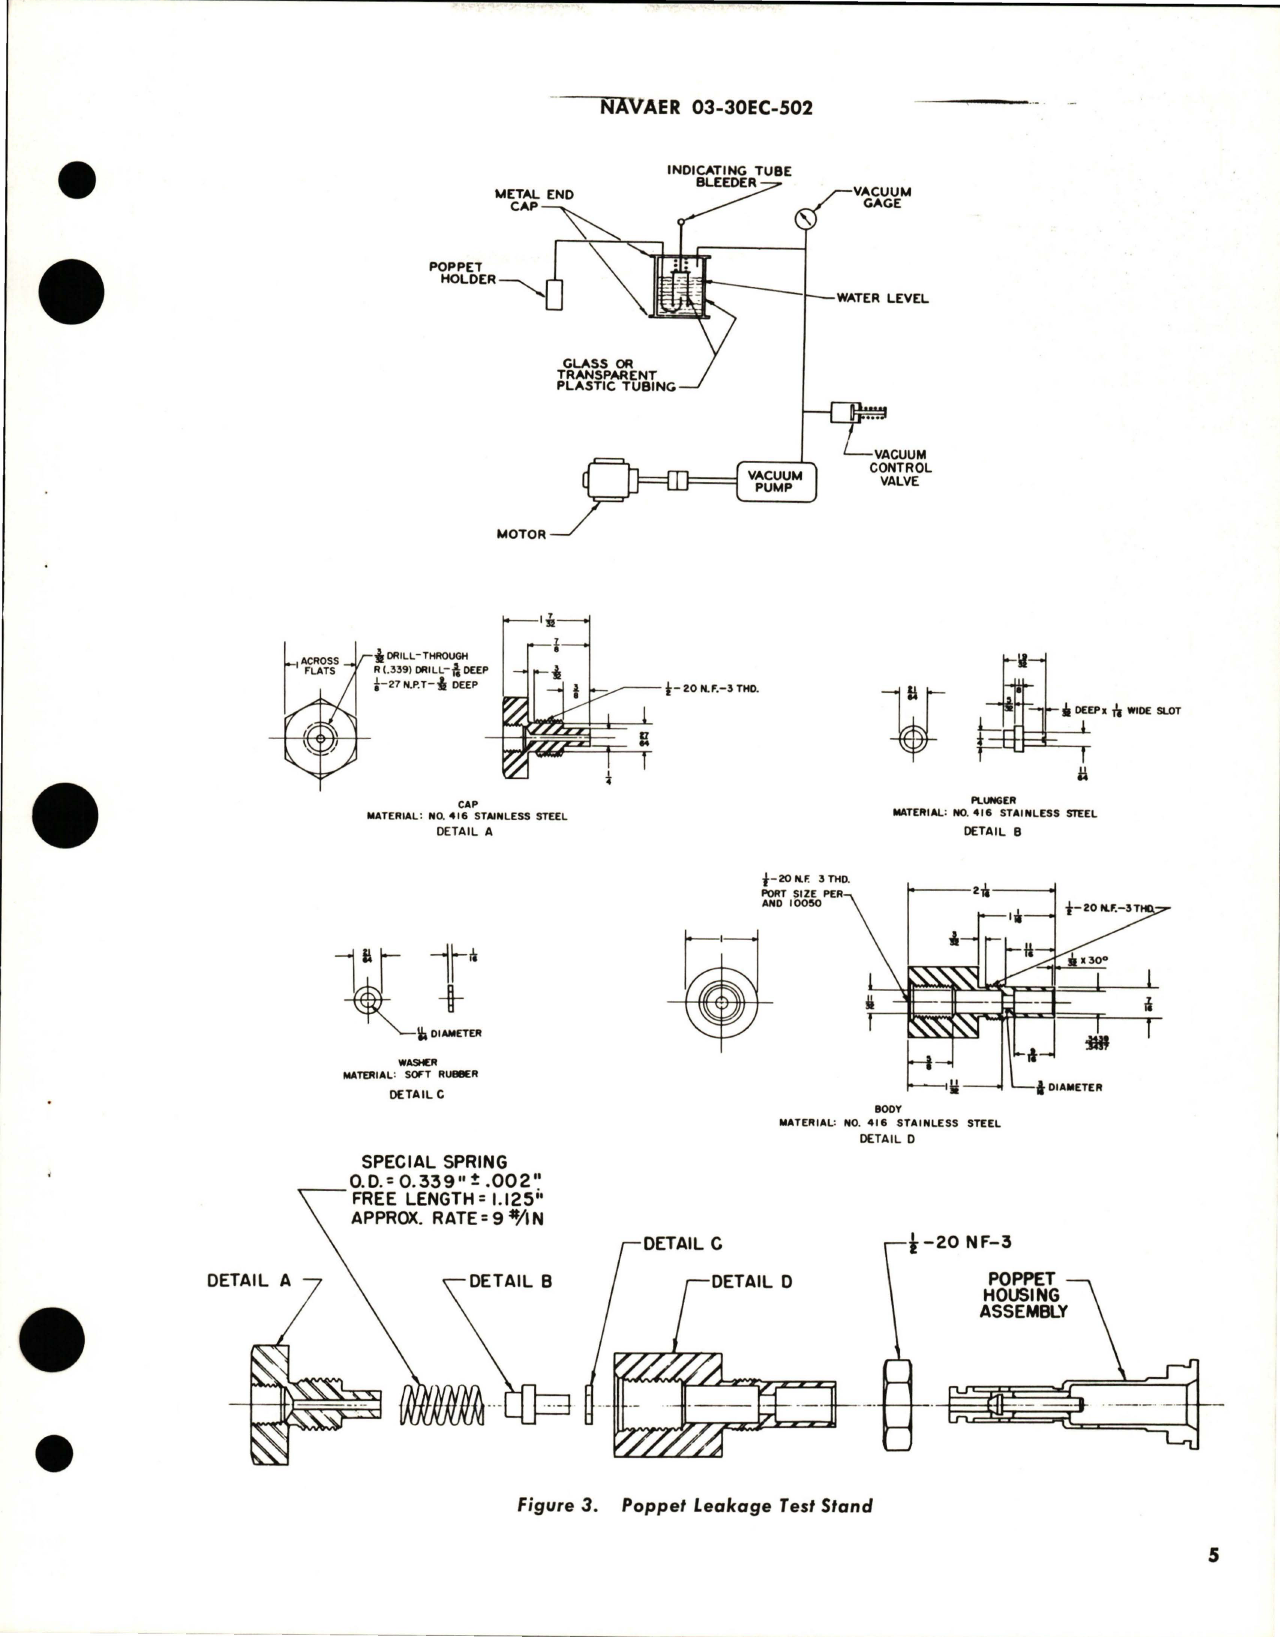 Sample page 9 from AirCorps Library document: Overhaul Instructions for Hydraulic Pressure Relief Valves